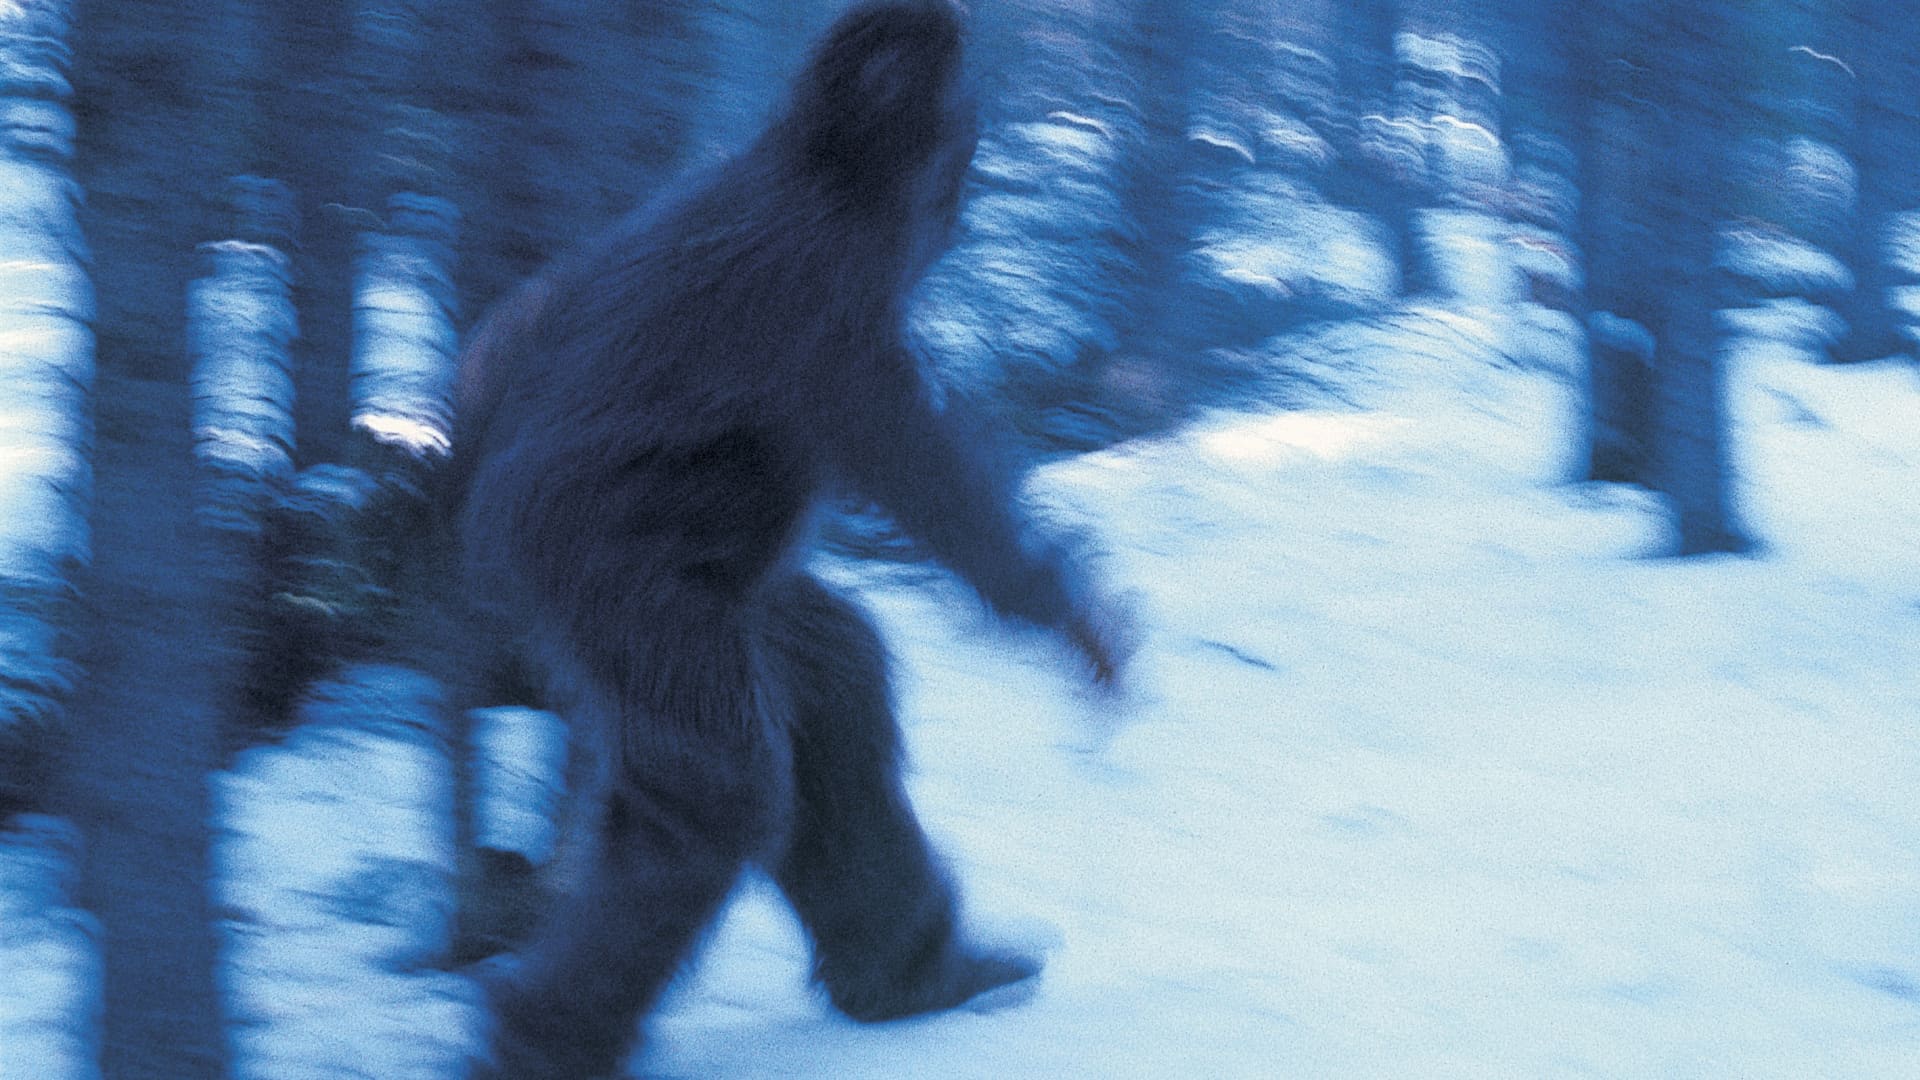 Why Do So Many People Still Want to Believe in Bigfoot?